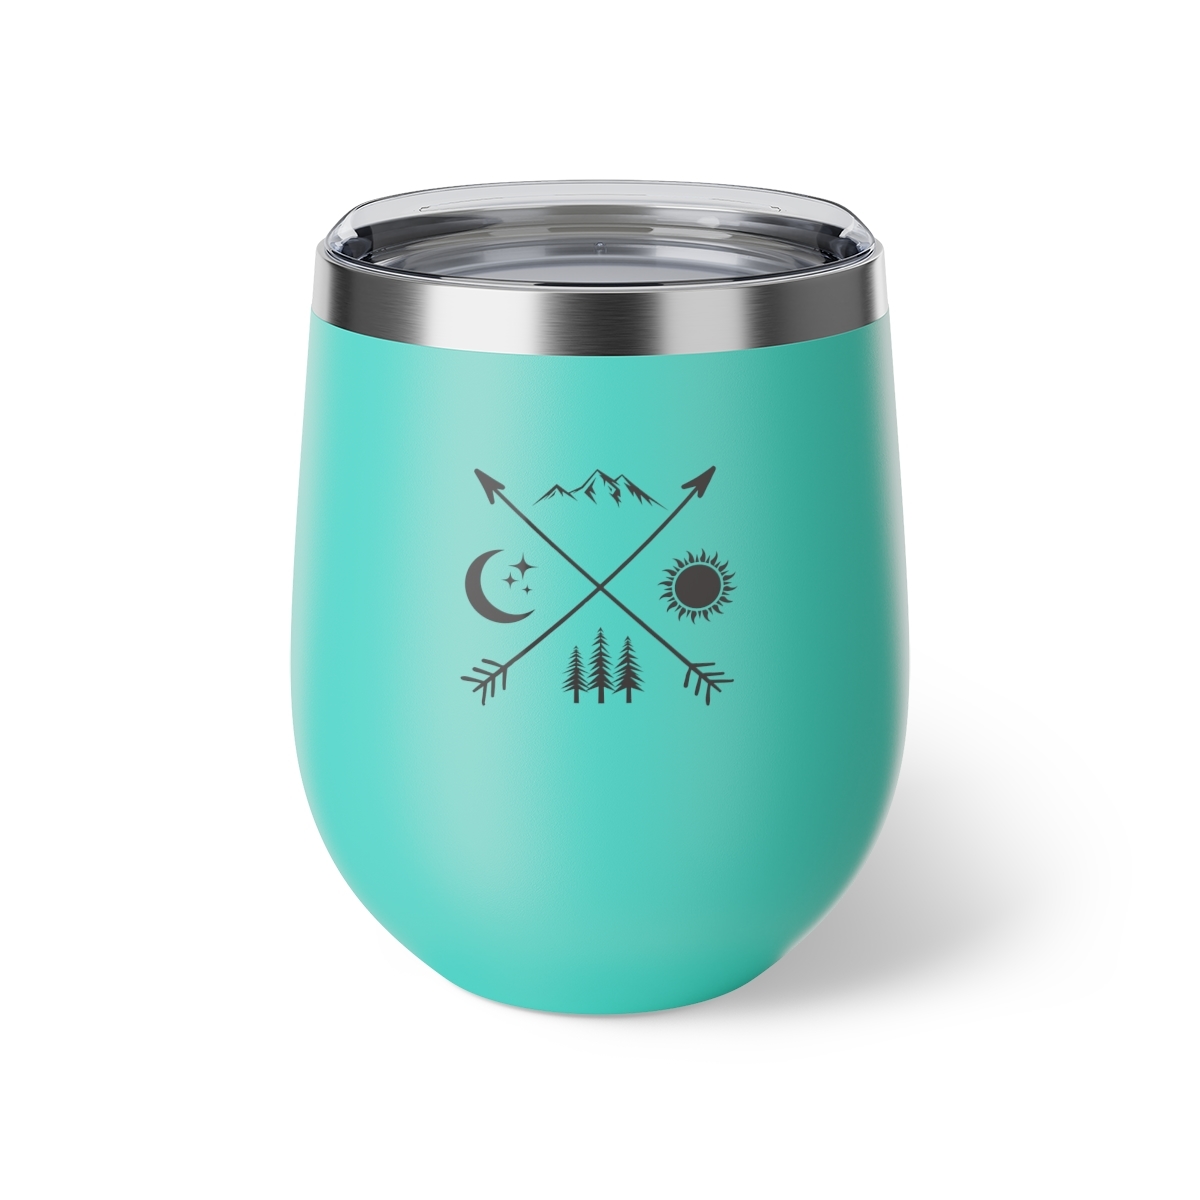 Personalized Copper Insulated Cup, 12oz, Rustic Outdoor Symbol Design, Black and - $33.99